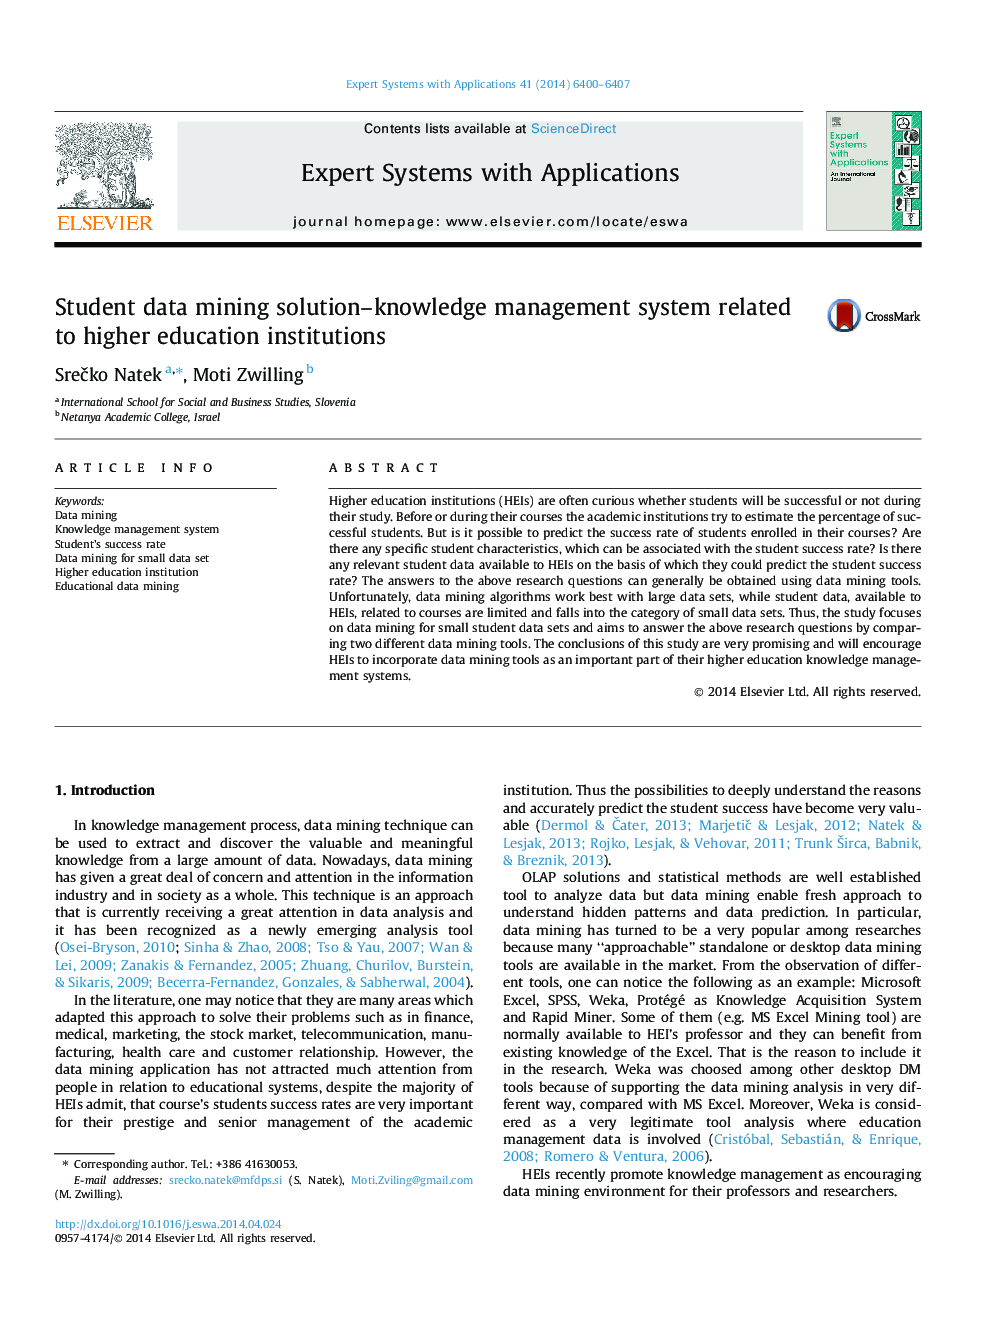 Student data mining solution–knowledge management system related to higher education institutions